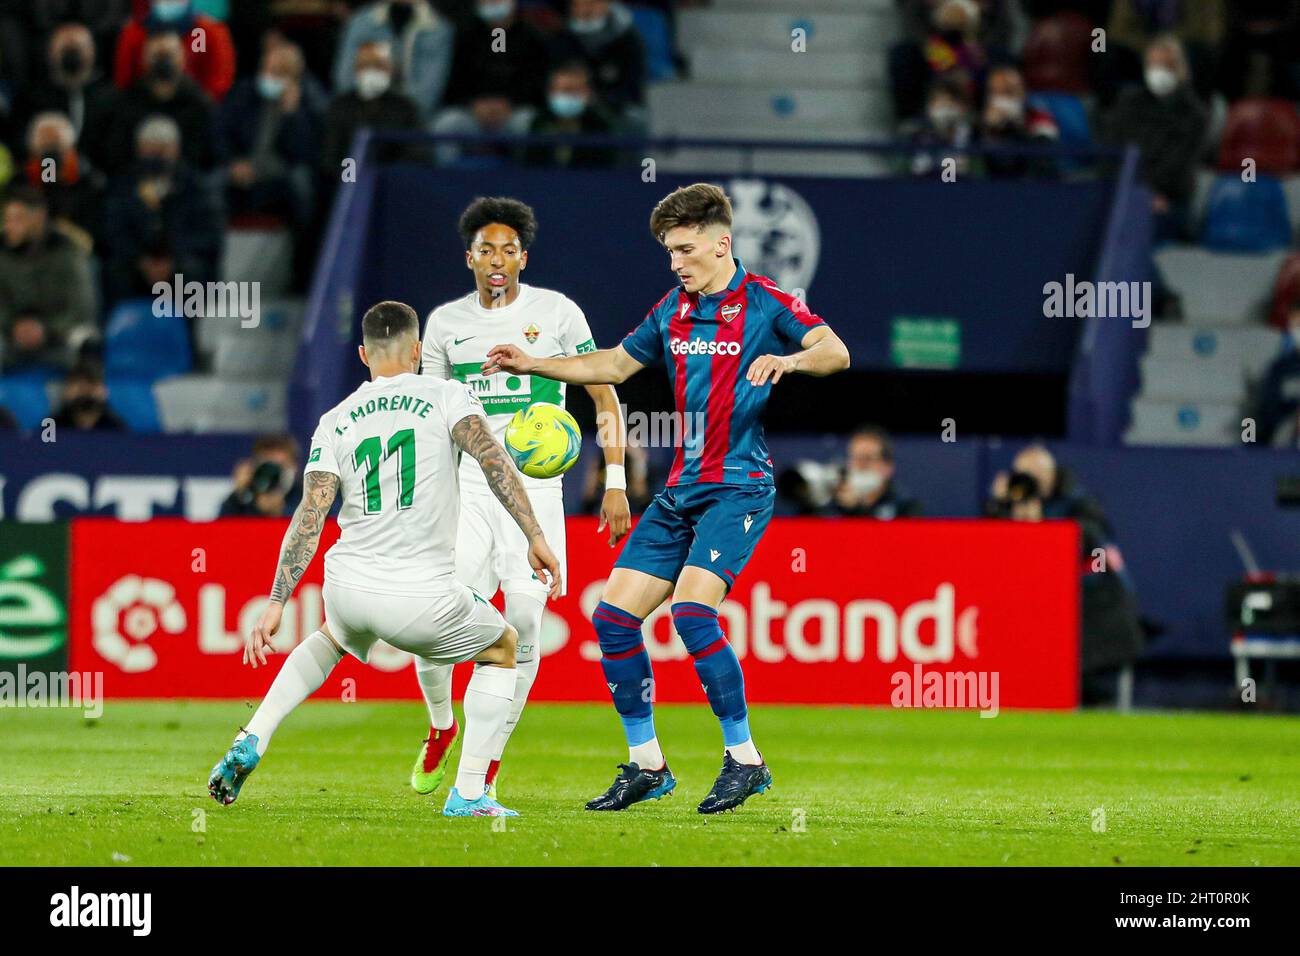 Valencia, Spain. 25th Feb, 2022. Jose Luis Garcia 'Pepelu' of Levante UD and Tete Morente of Elche CF during the Spanish championship La Liga football match between Levante UD and Elche CF on February 25, 2022 at the Ciutat de Valencia Stadium in Valencia, Spain - Photo: Ivan Terron/DPPI/LiveMedia Credit: Independent Photo Agency/Alamy Live News Stock Photo